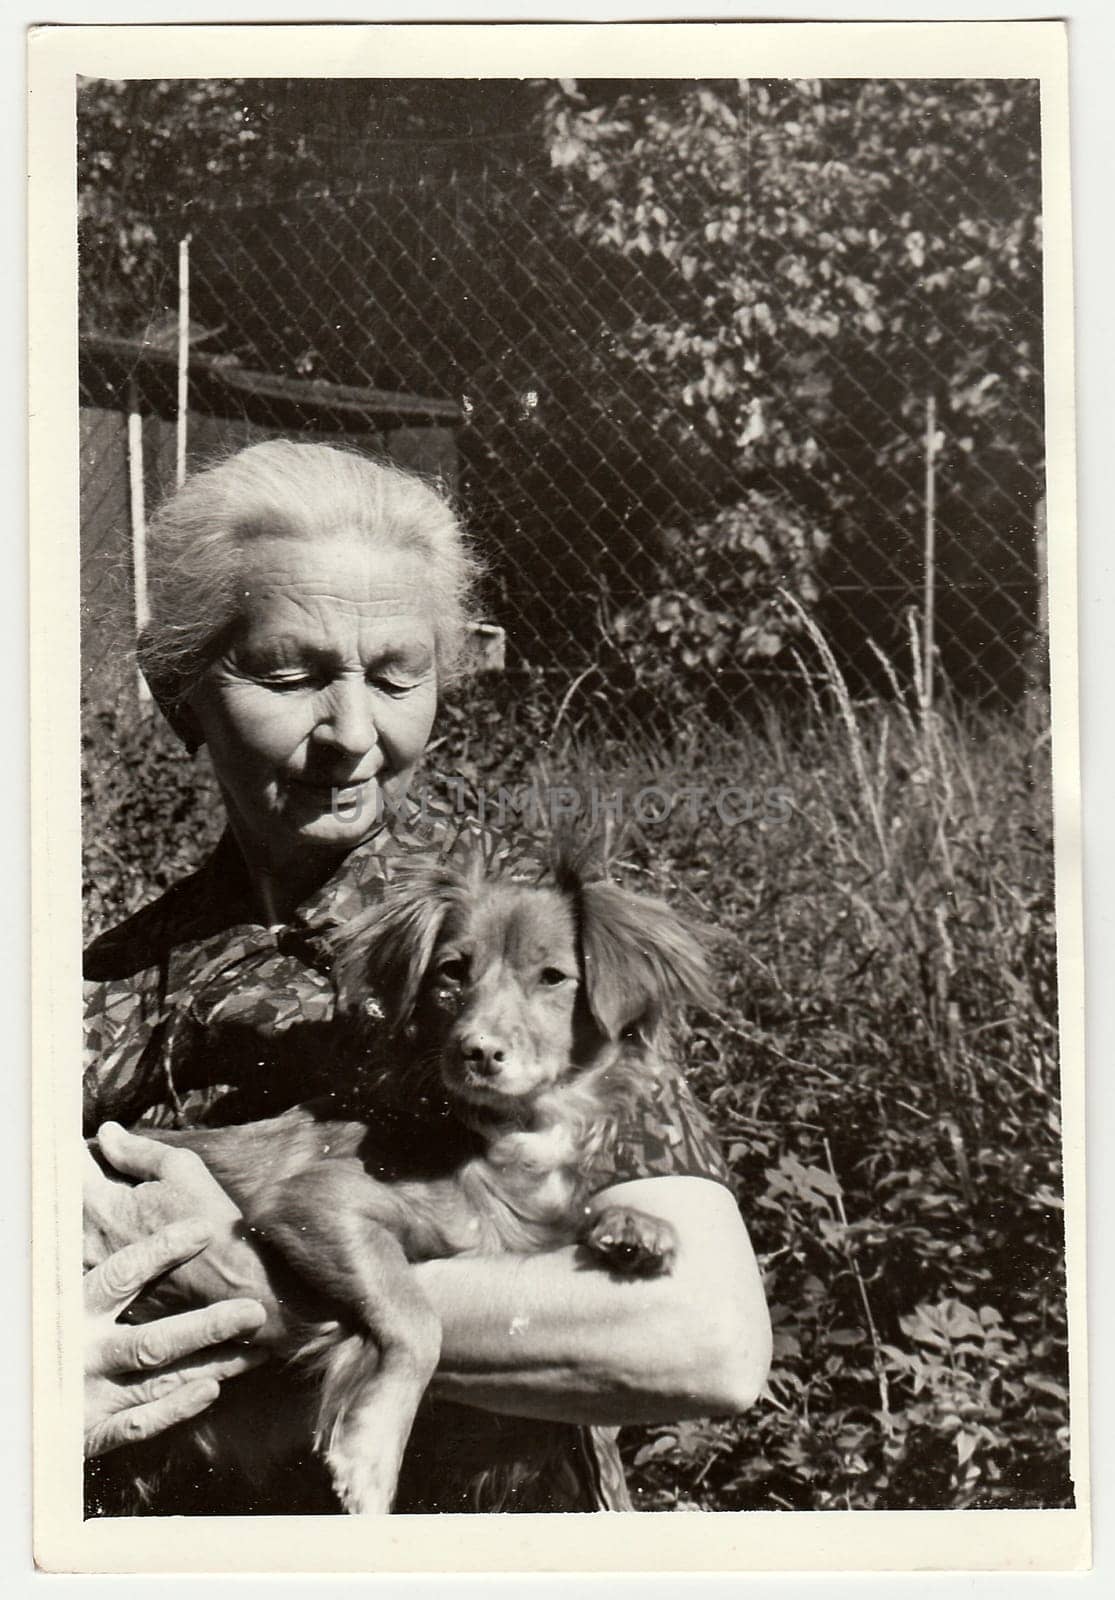 Vintage photo shows old woman cradles dog (dachshund). by roman_nerud